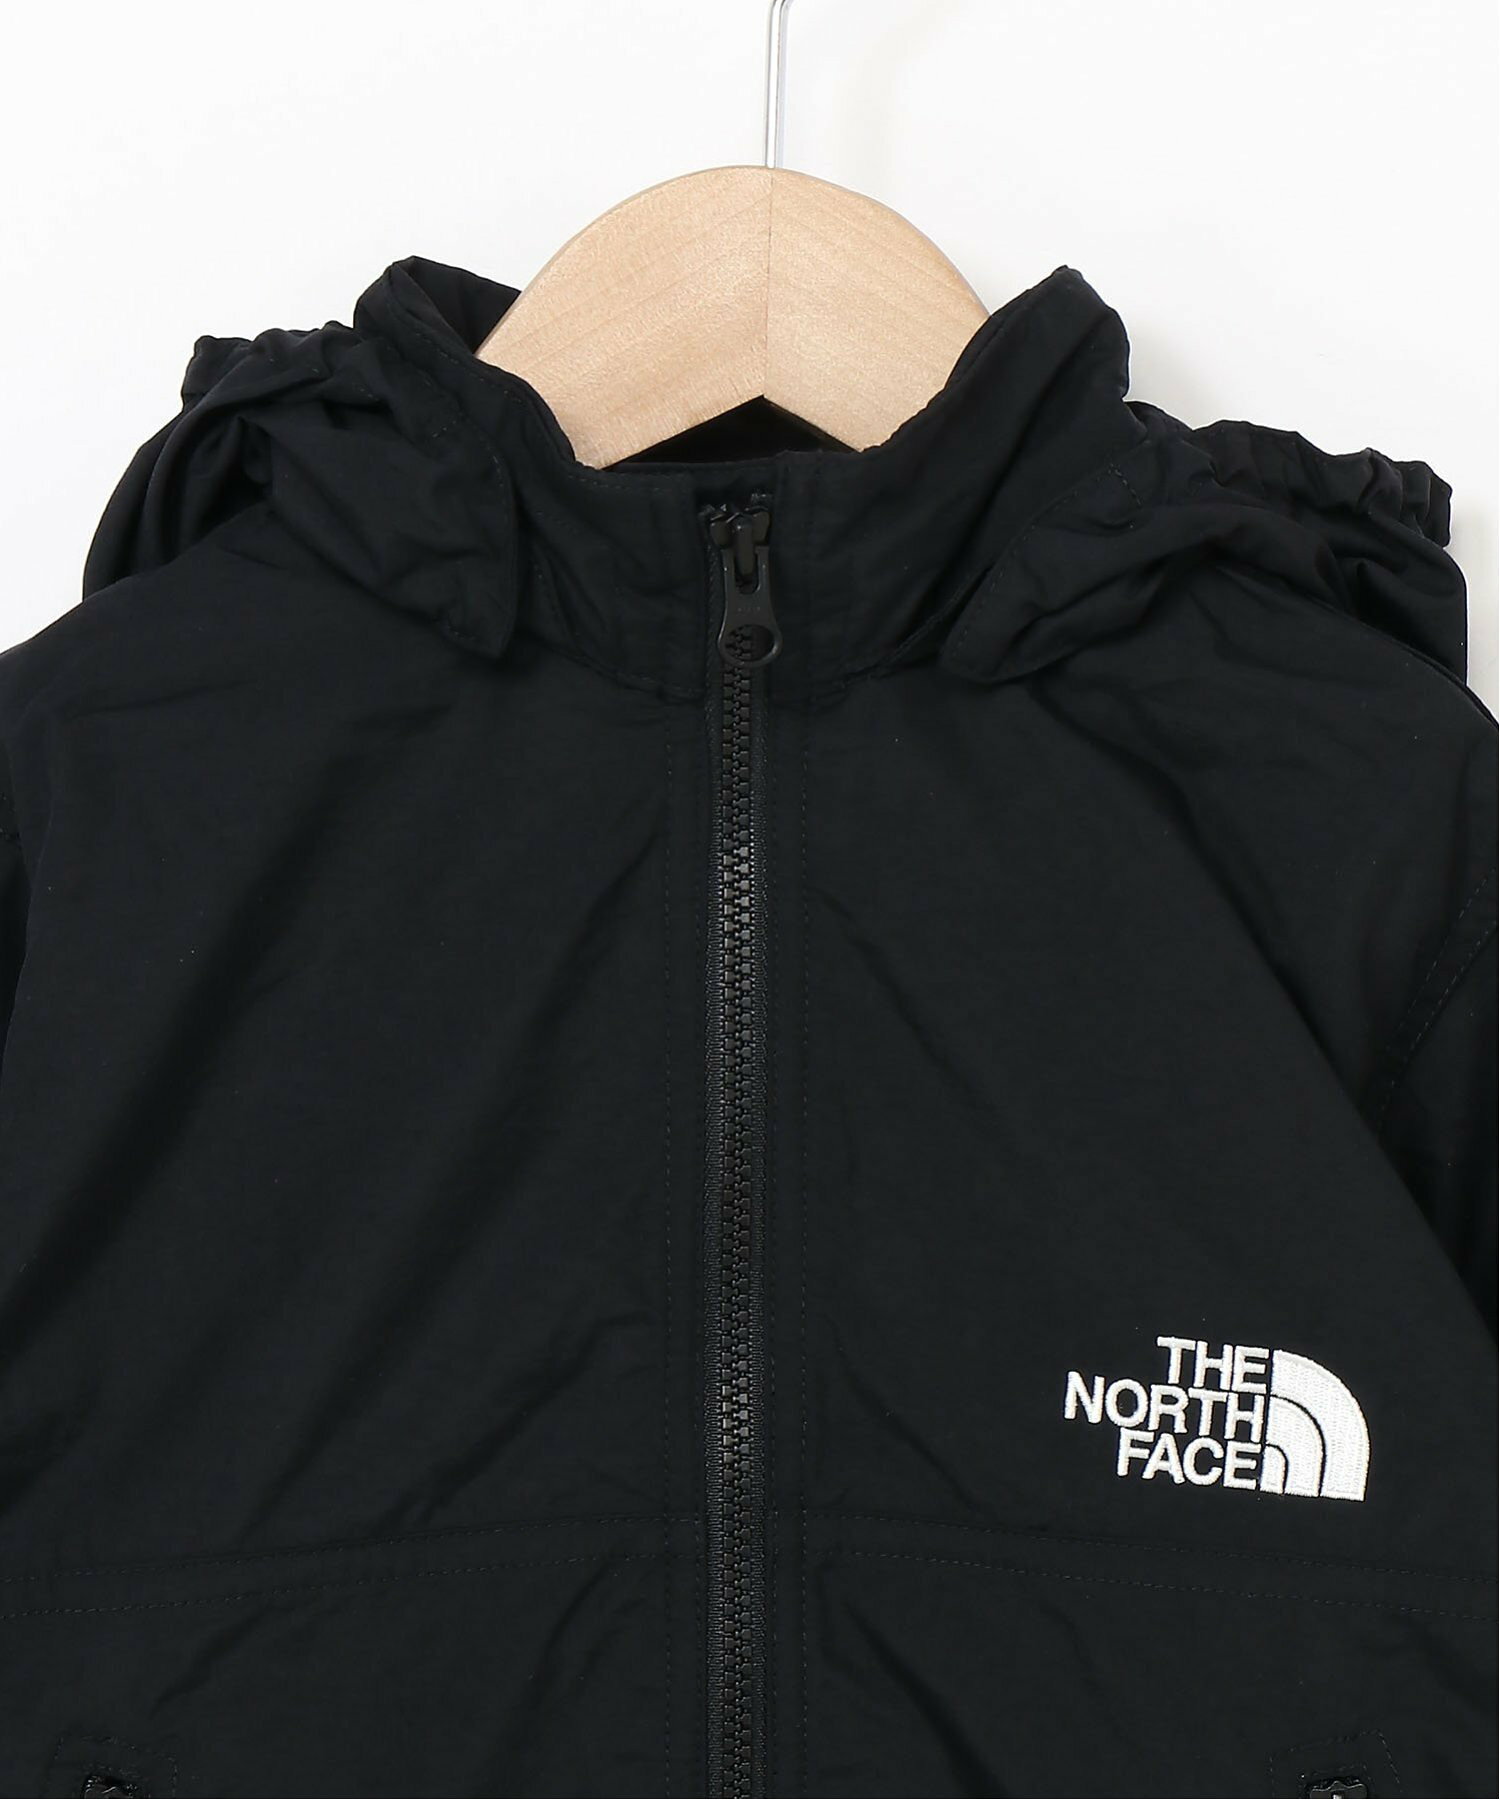 THE NORTH FACE/NPJ72310 キッズ コンパクトジャケット